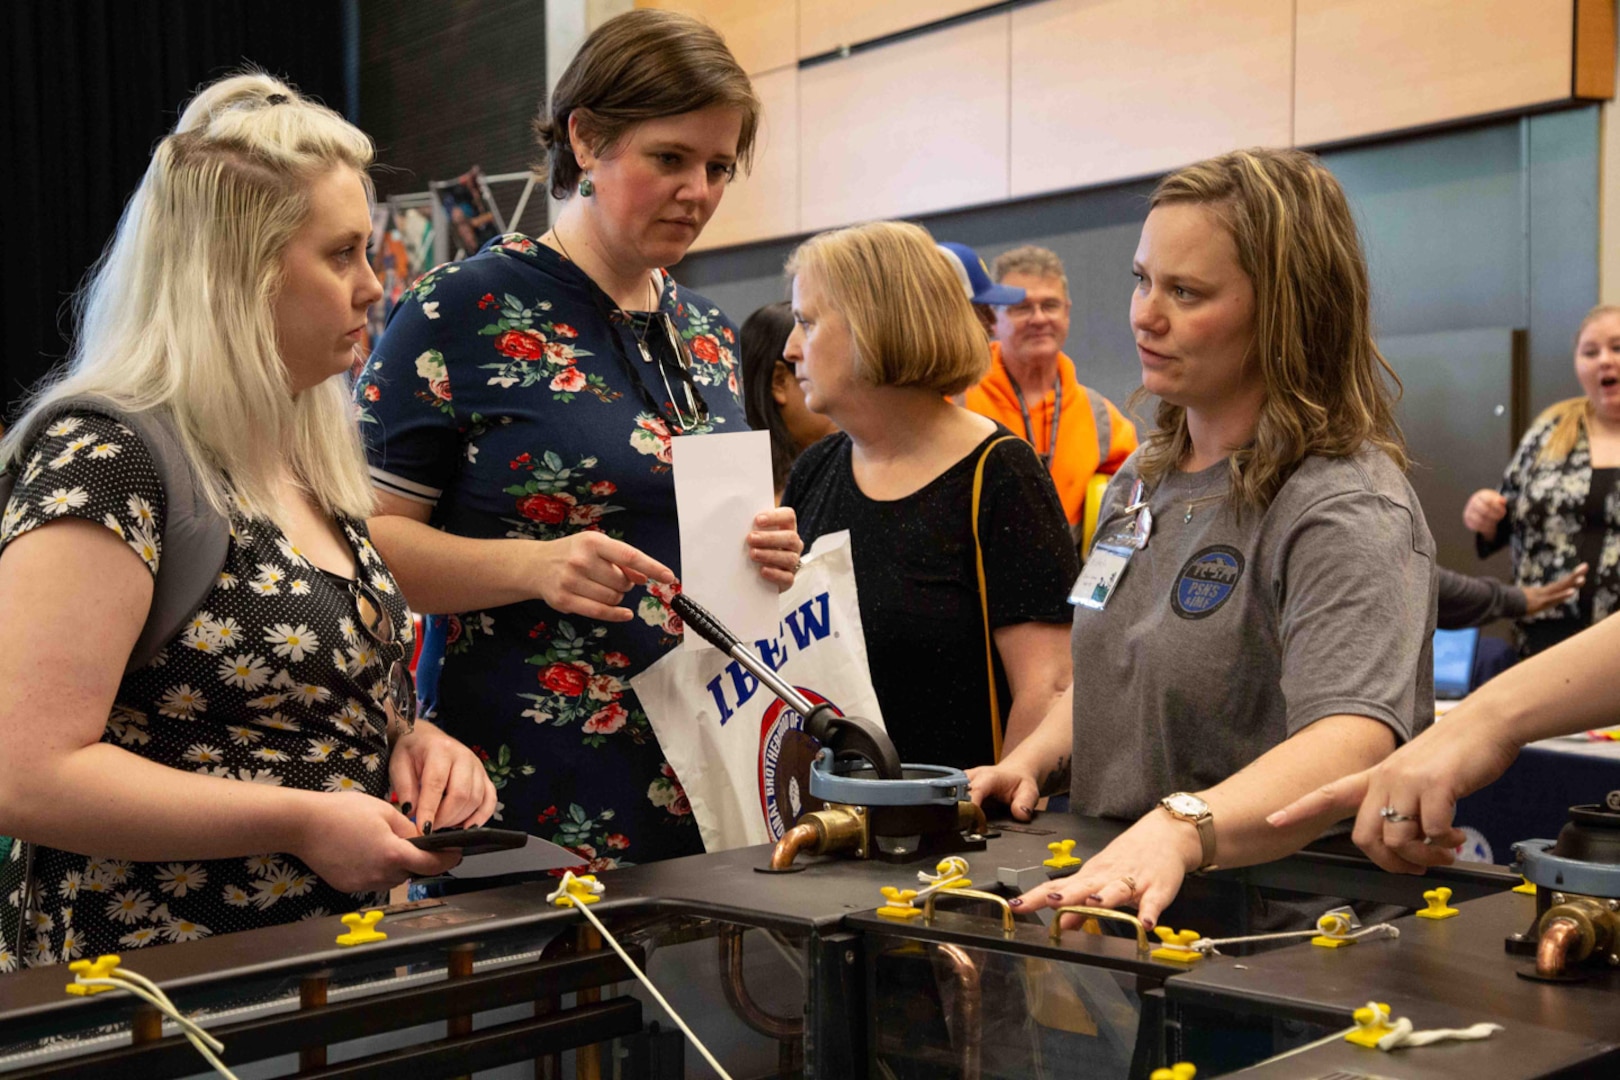 Michelle Berger (right) represents Puget Sound Naval Shipyard & Intermediate Maintenance Facility at the 2019 Seattle Women in Trades fair.